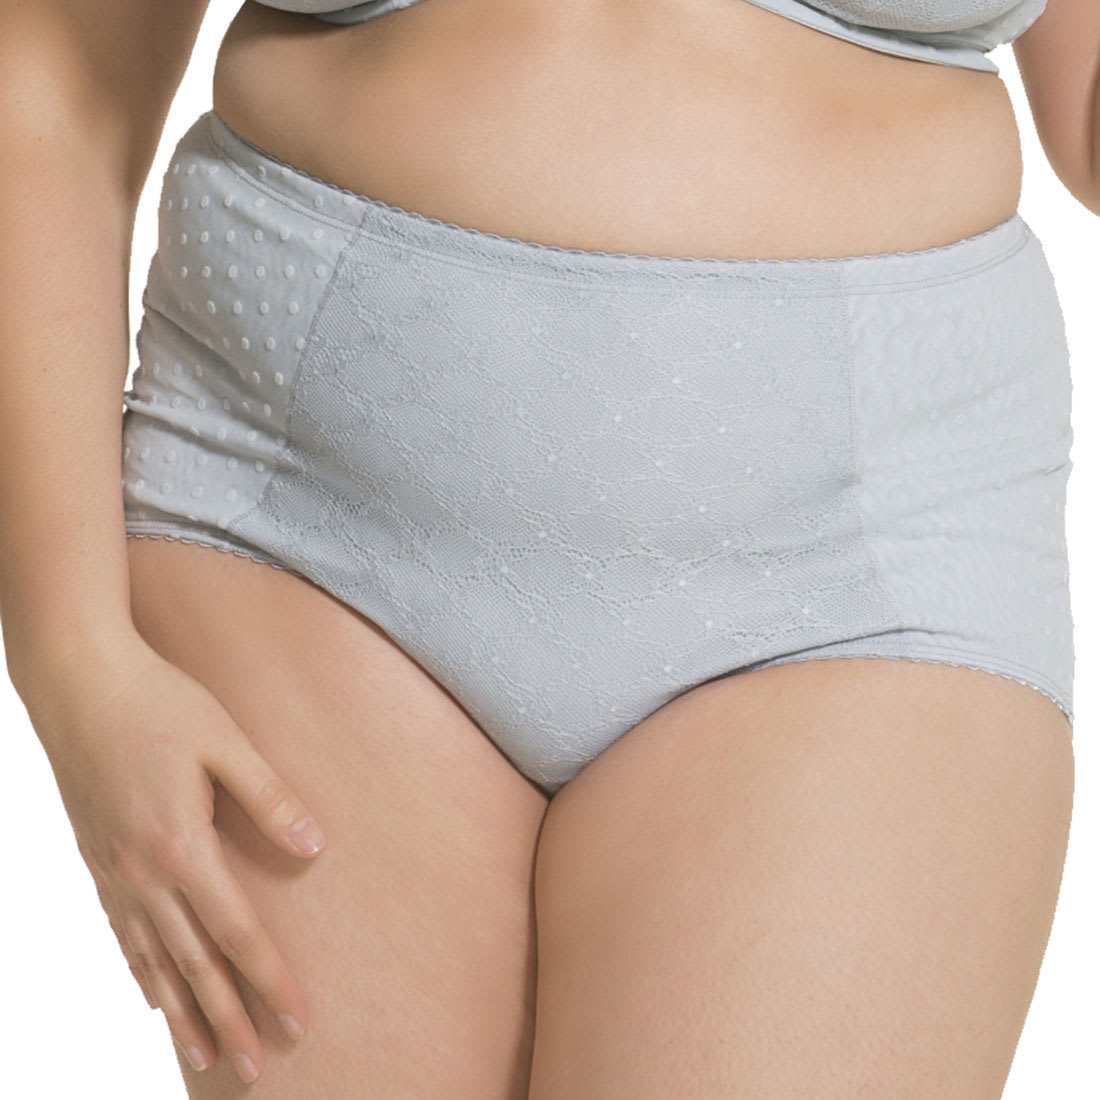 Cake Maternity Frosted Parfait High Waist Brief